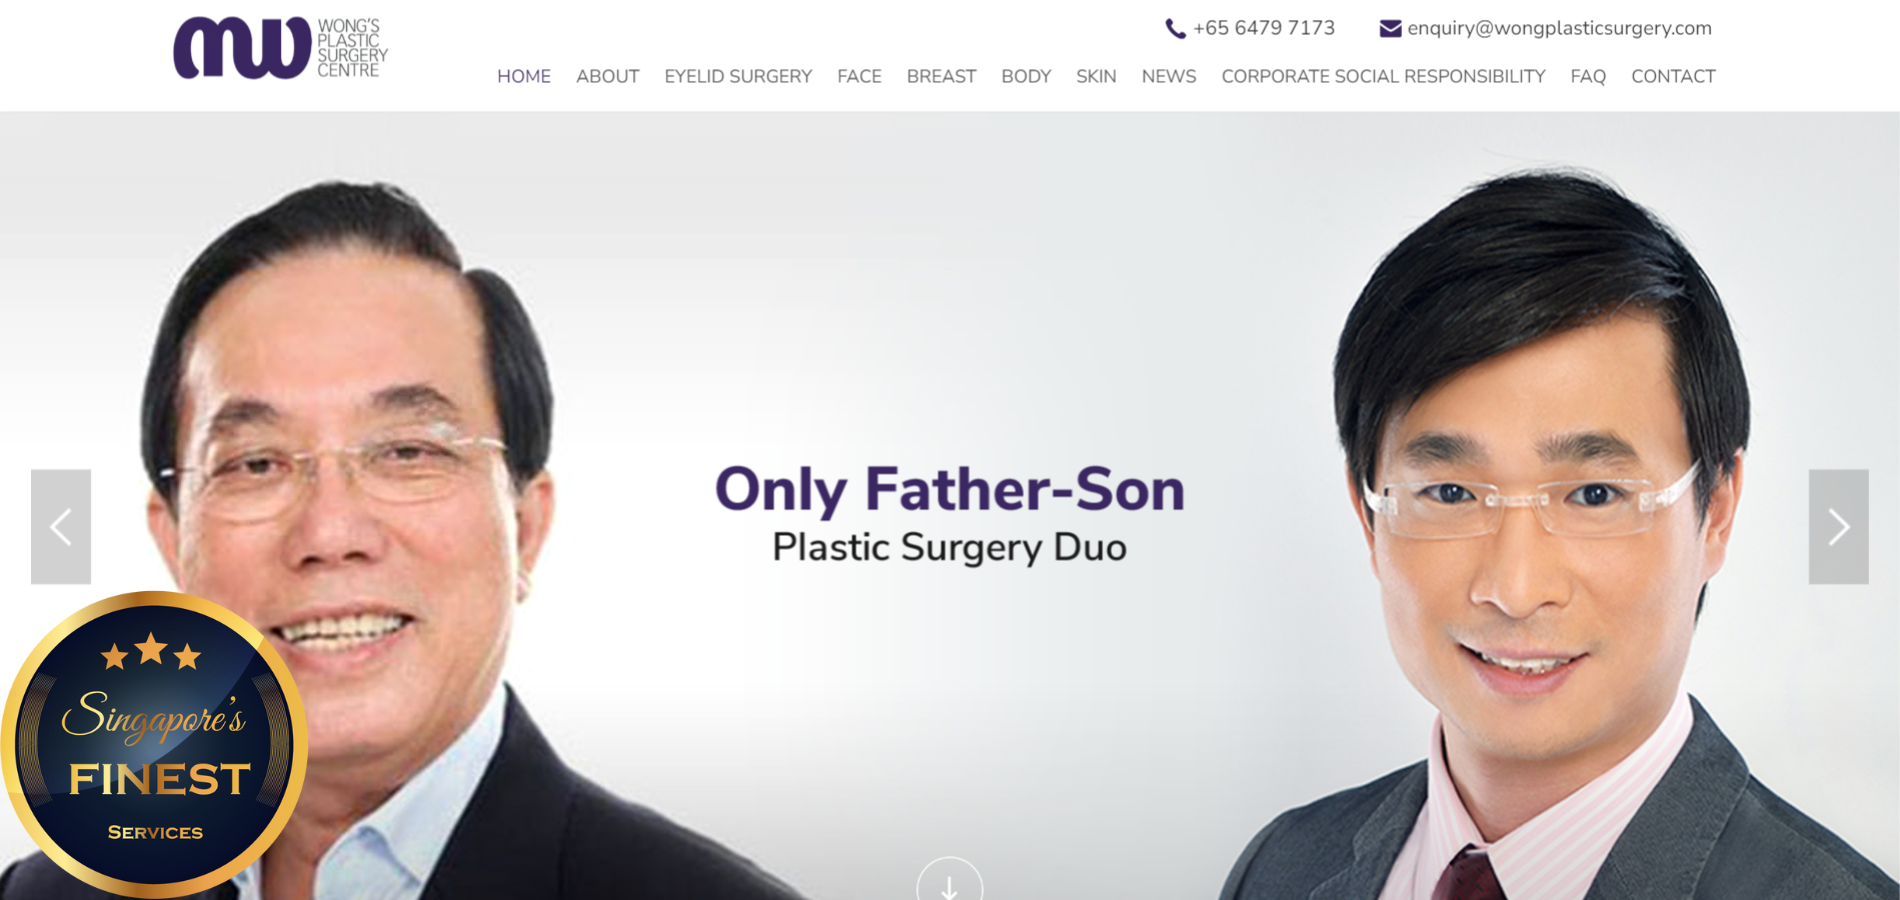 The Finest Clinics For Dimple Creation Surgery in Singapore